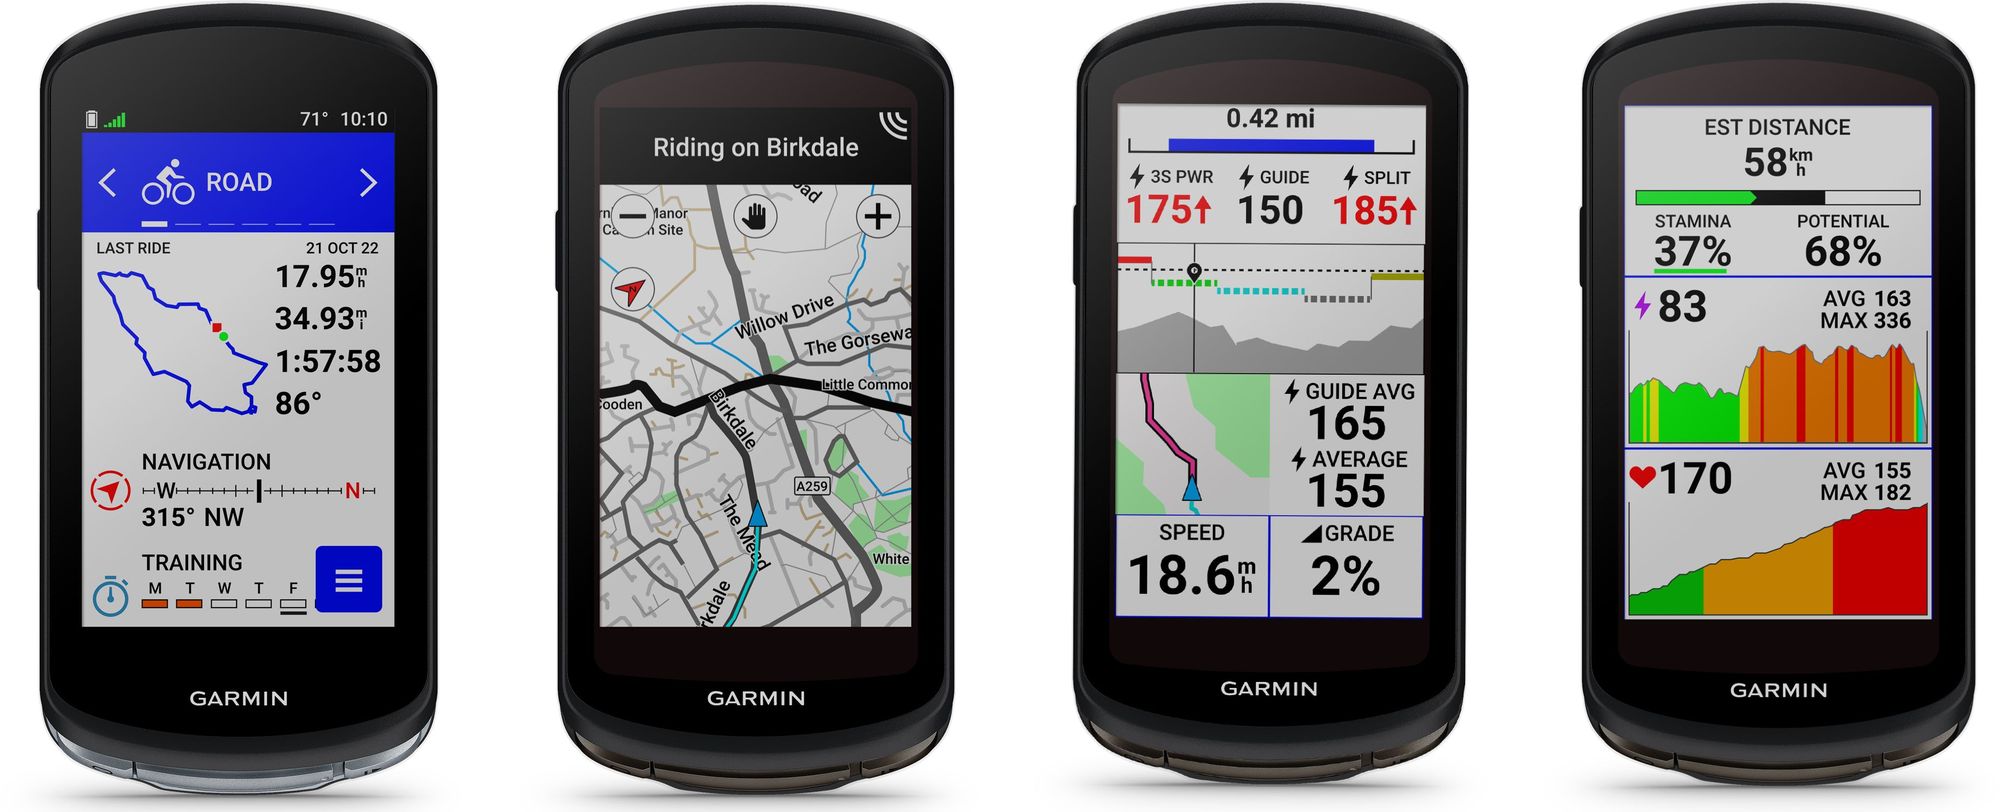 Garmin Edge 1040 - Next-gen cyling computers with / without solar